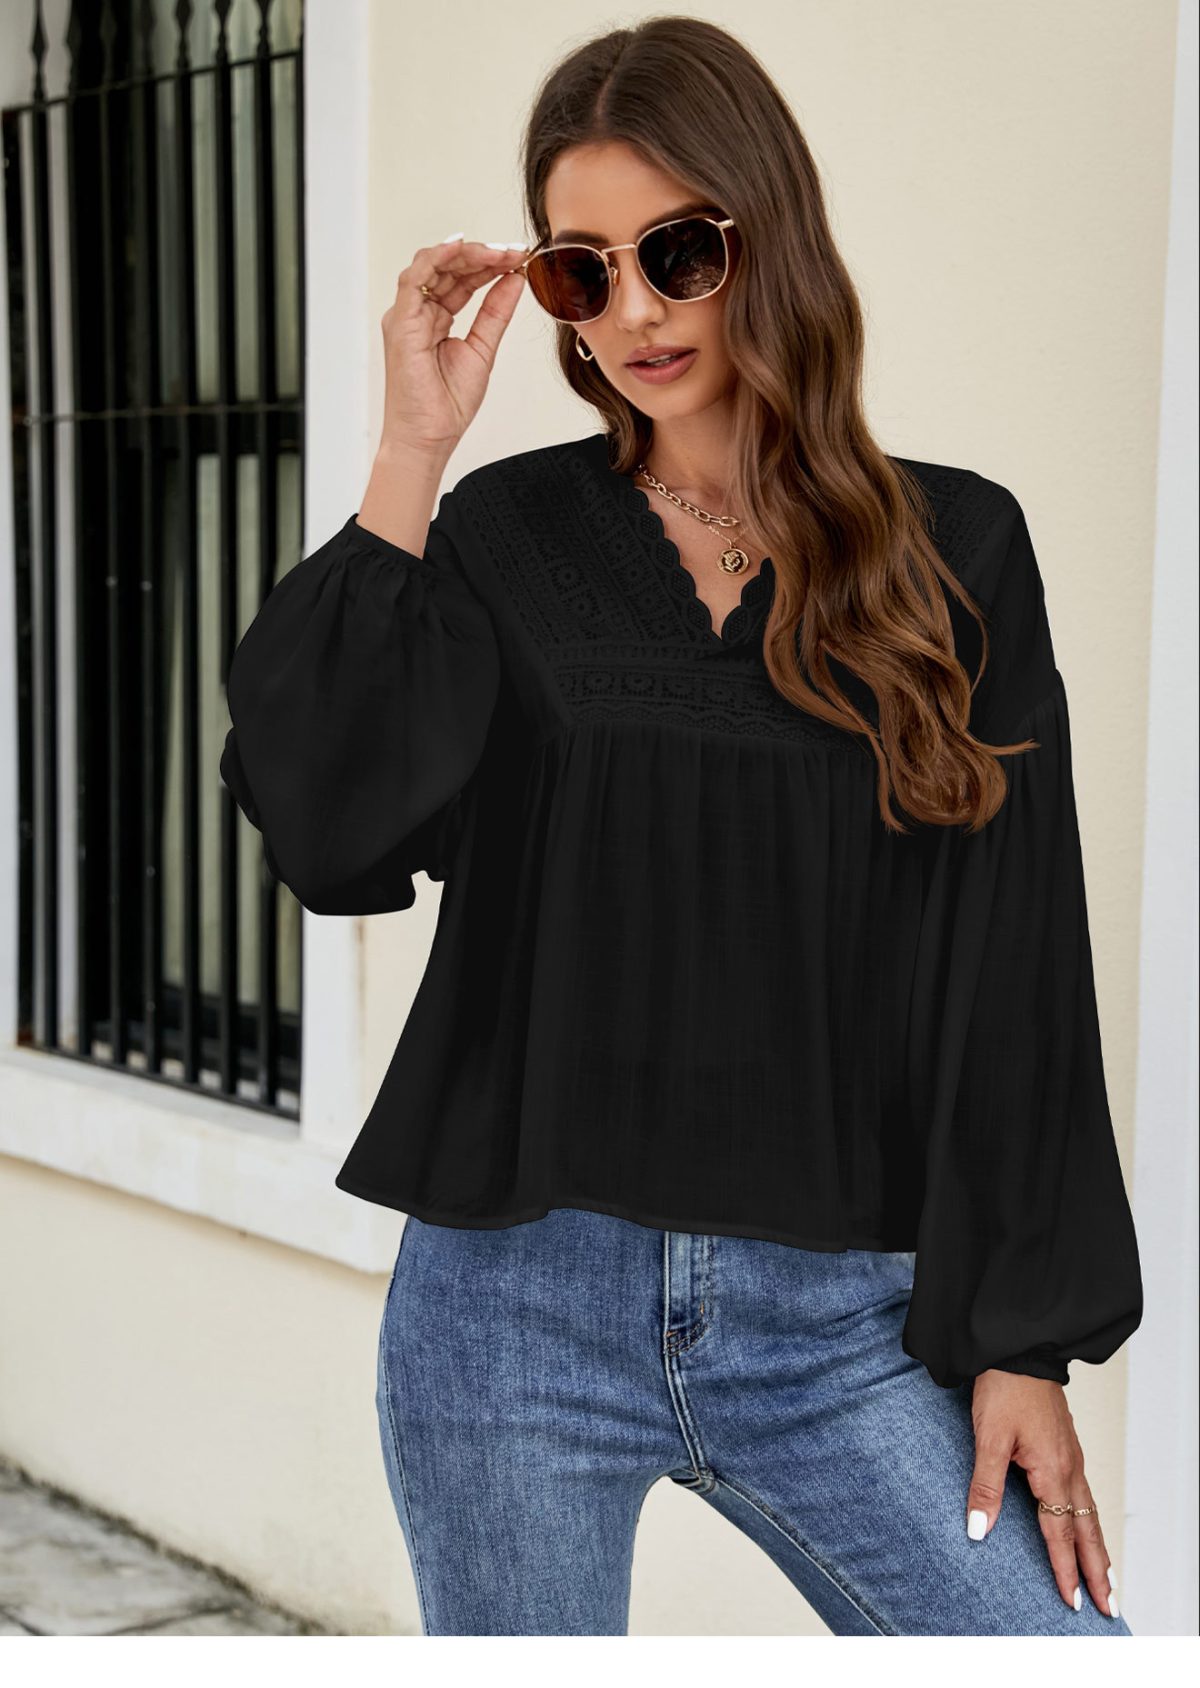 Solid Color Lantern Sleeve Chiffon Shirt in Blouses & Shirts